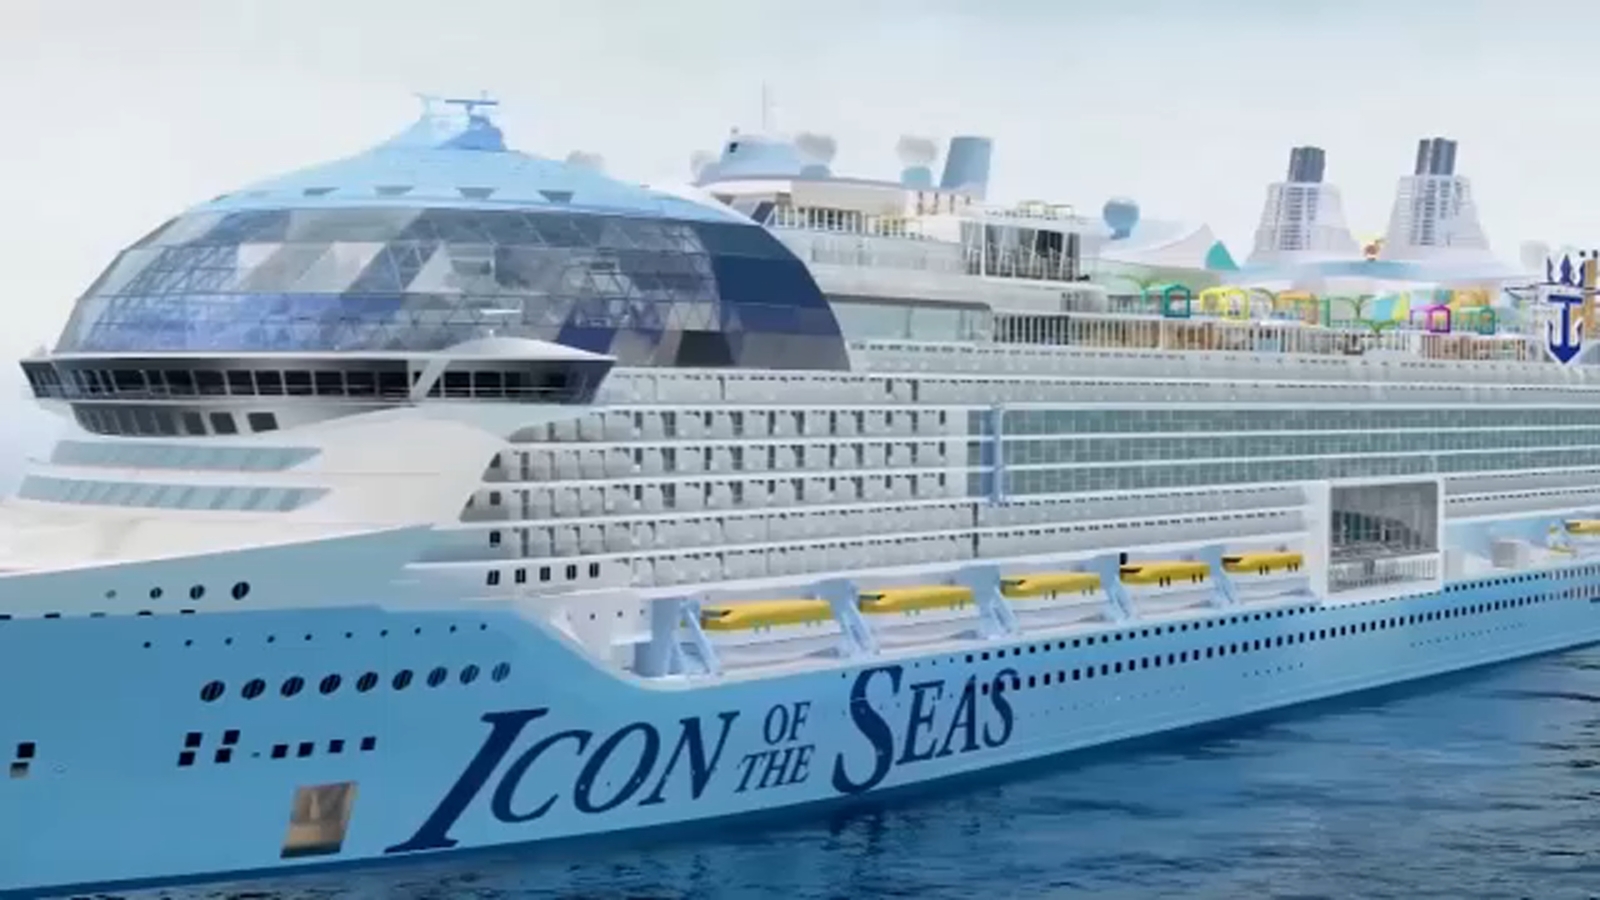 Fire breaks out on Royal Caribbean’s Icon of the Seas, the world’s largest cruise ship [Video]